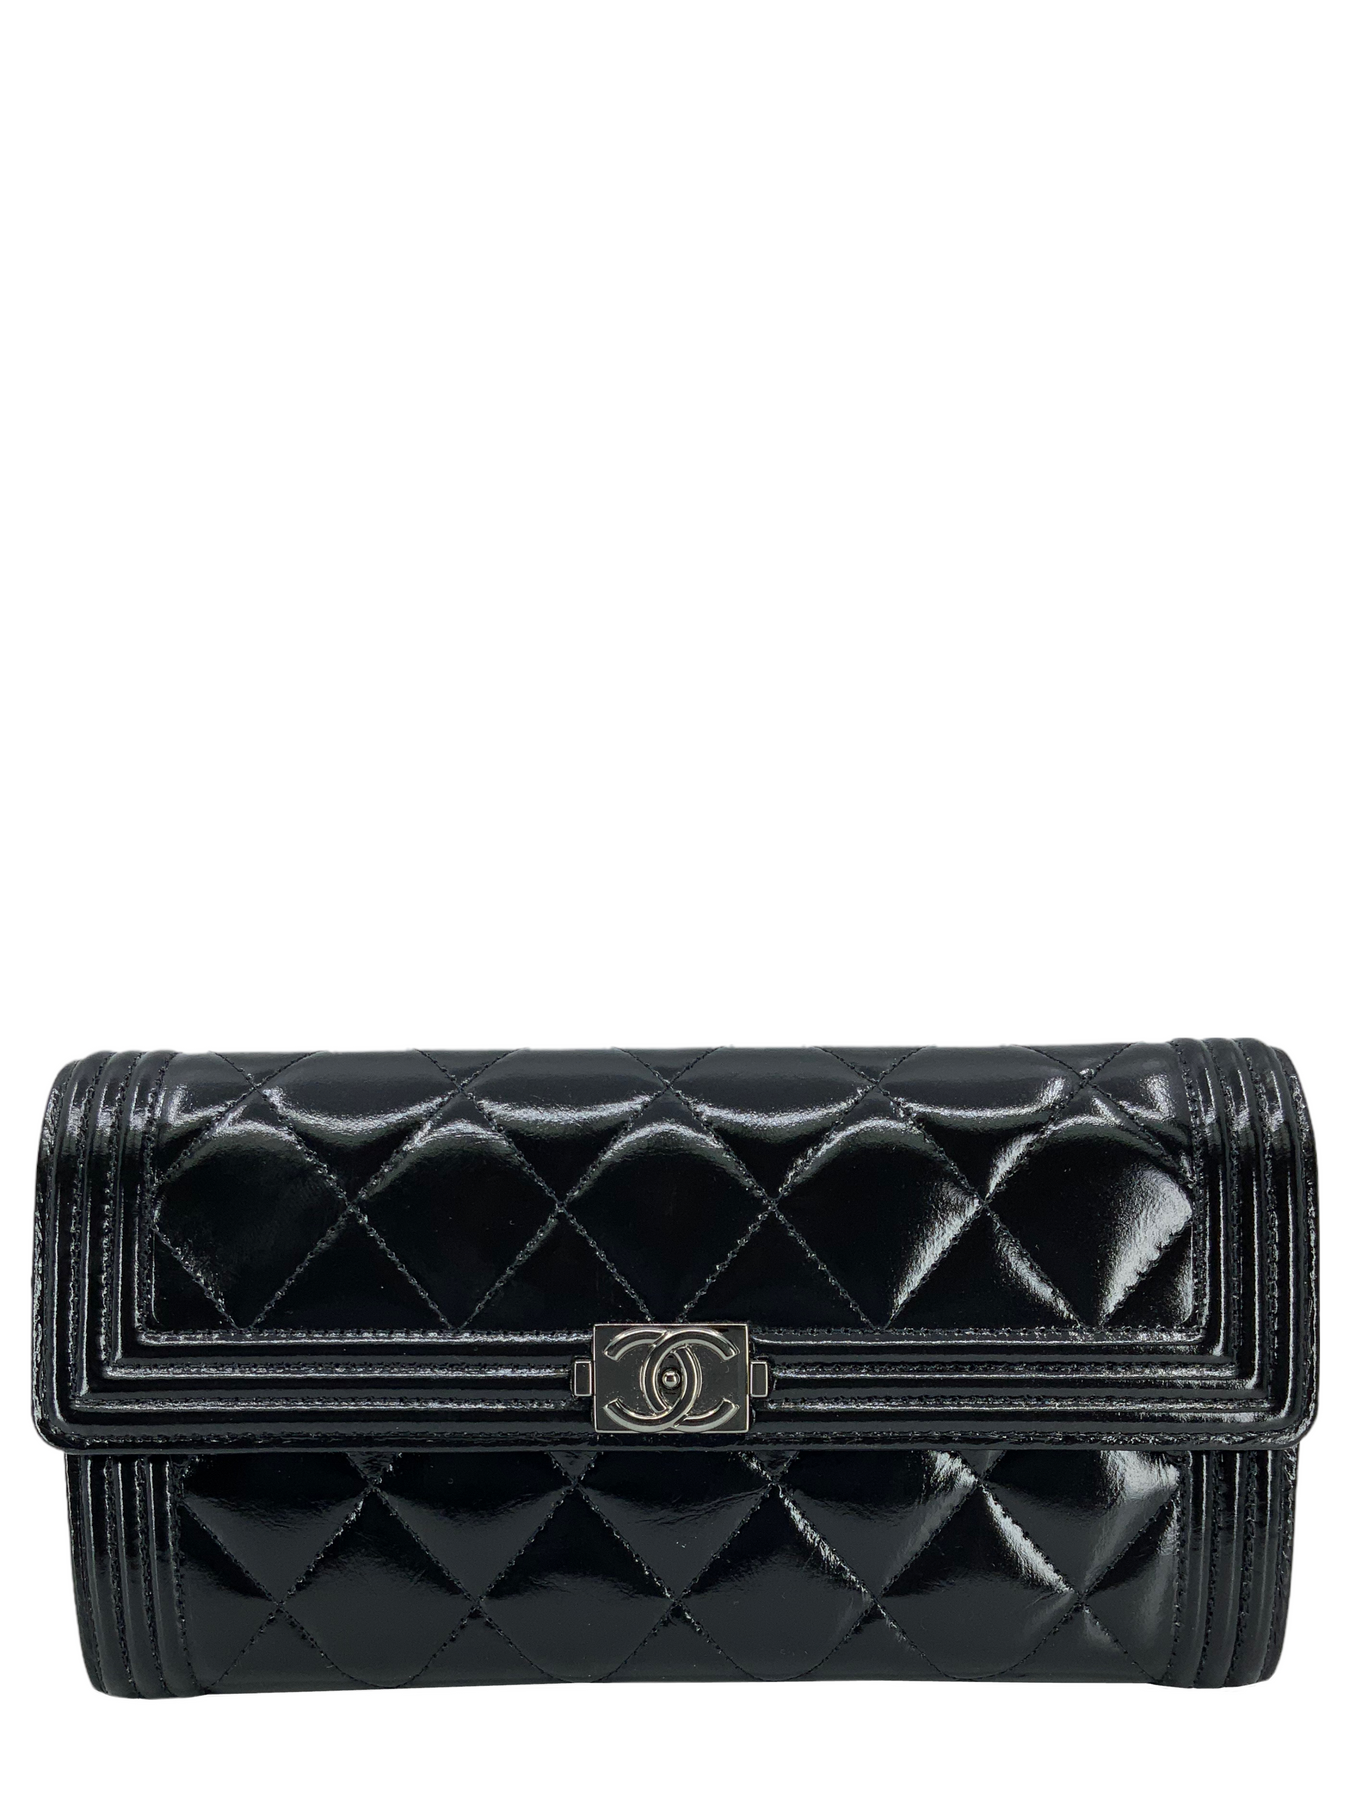 Chanel Black Quilted Leather Boy Zip around Continental Wallet Chanel